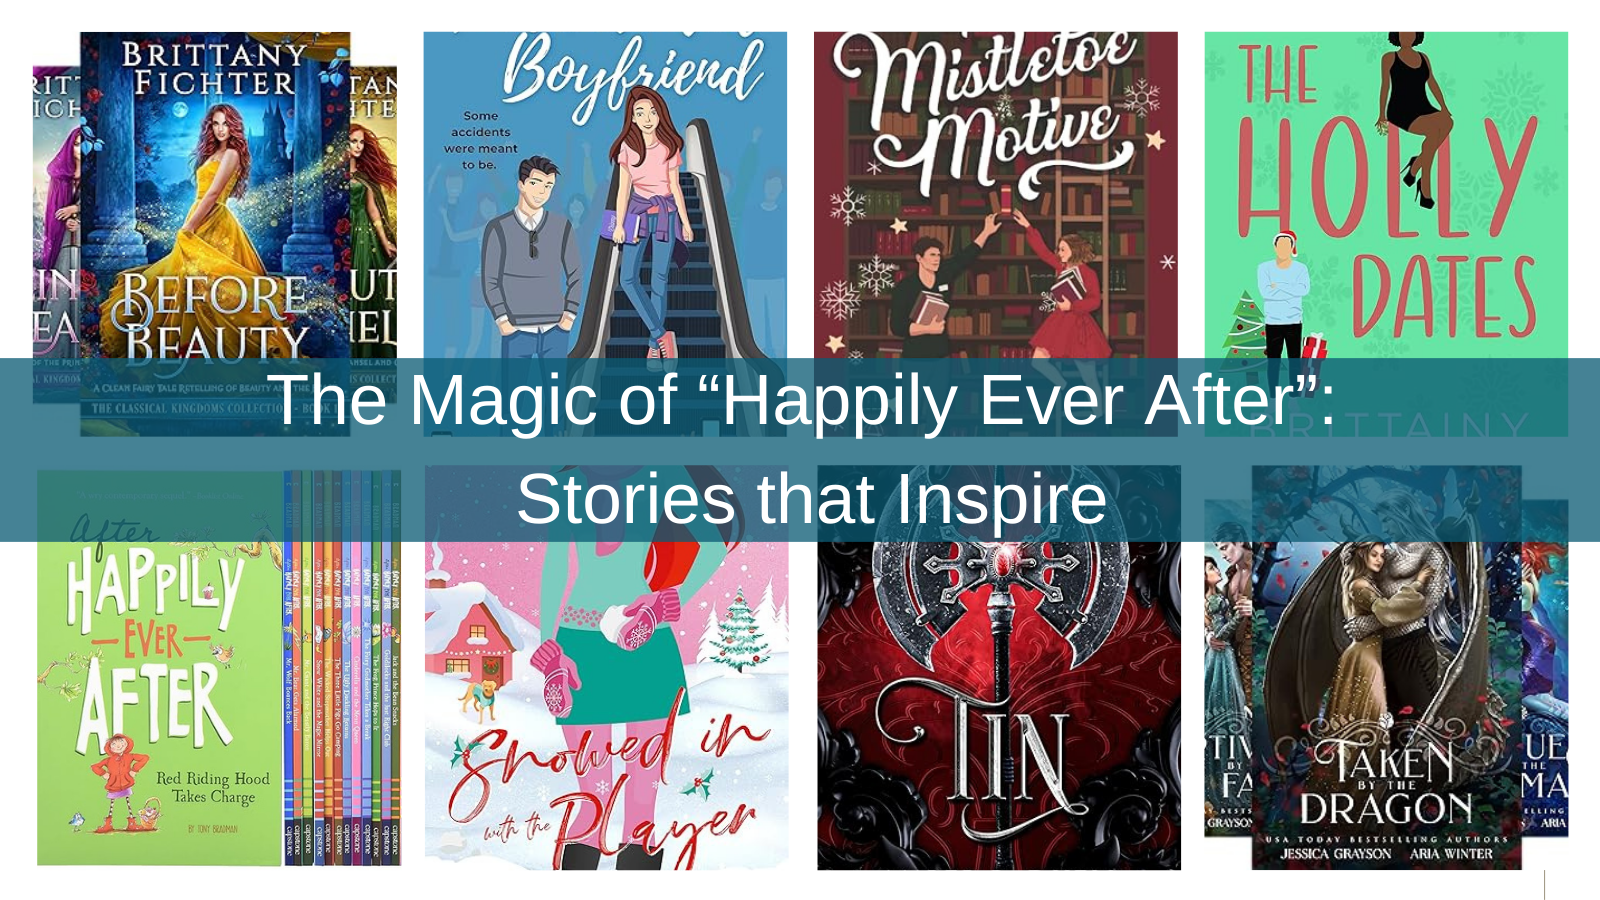 The Magic of “Happily Ever After”: Stories that Inspire